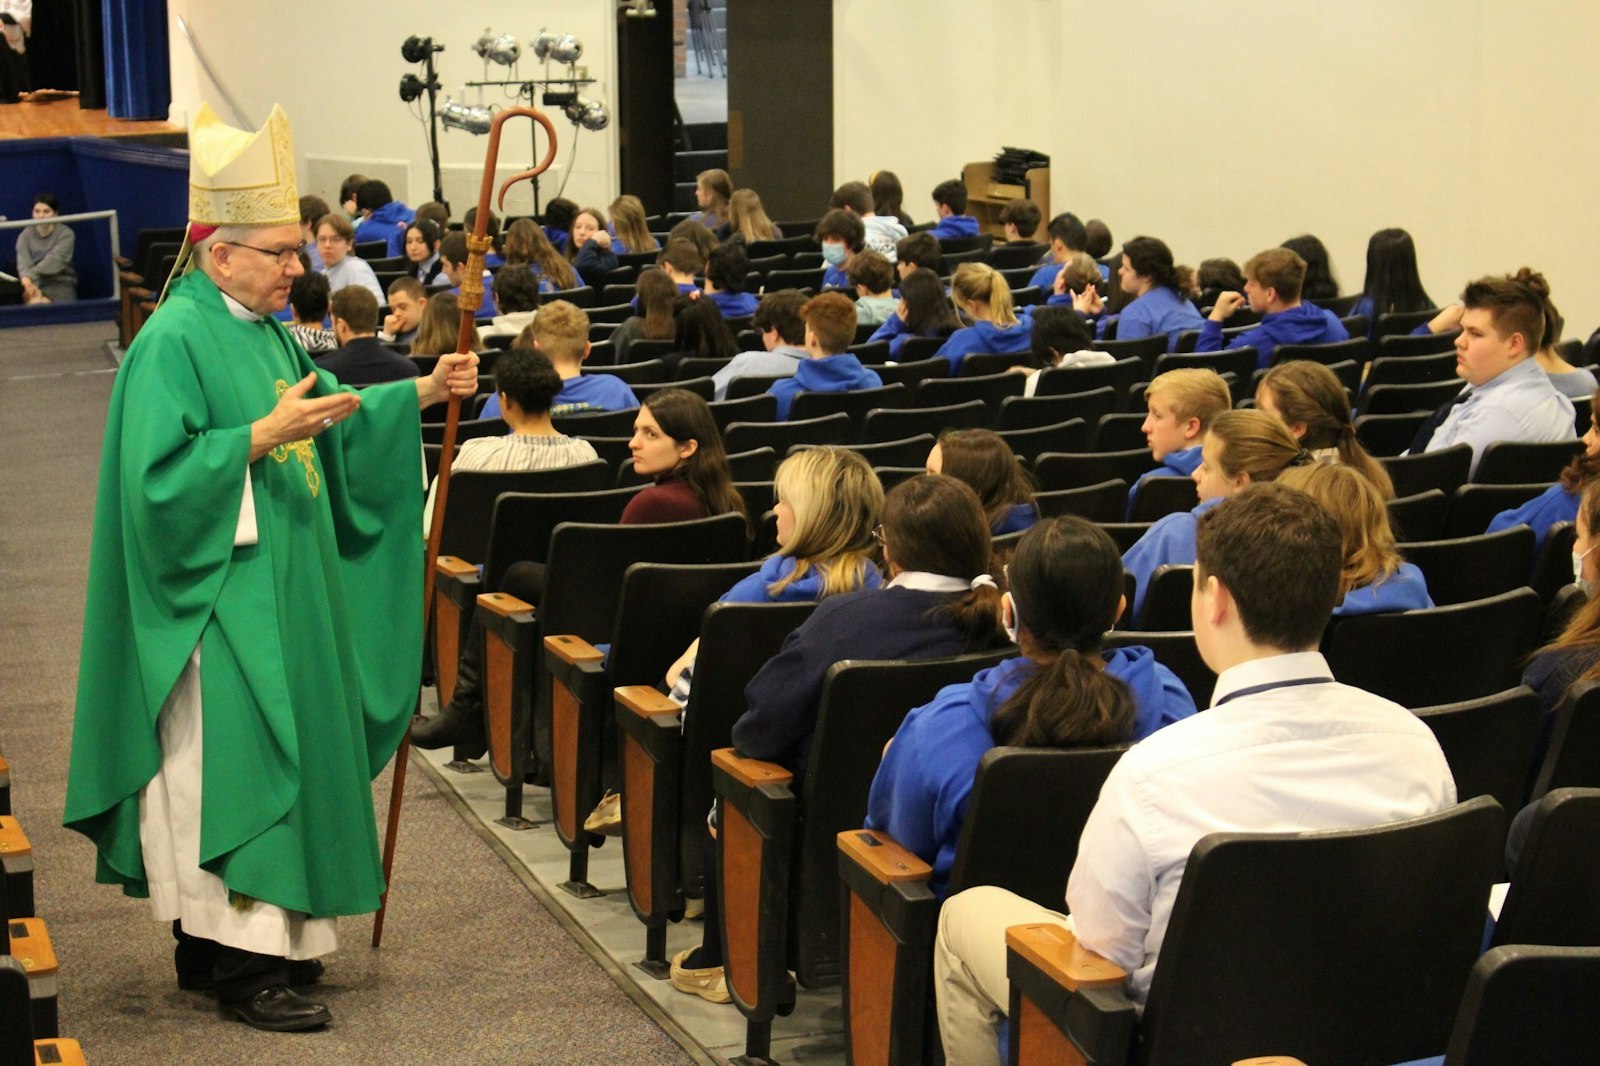 Bishop Monforton answers questions about the Catholic faith from students at Catholic Central High School in Steubenville, Ohio, during Catholic Schools Week. The bishop, a strong proponent of evangelization, frequently visited Catholic schools to allow students to ask questions about Catholic teaching, faith and morals, eventually compiling material from these sessions into a book, "Ask the Bishop: Questions and Answers Over the Years," in 2020.